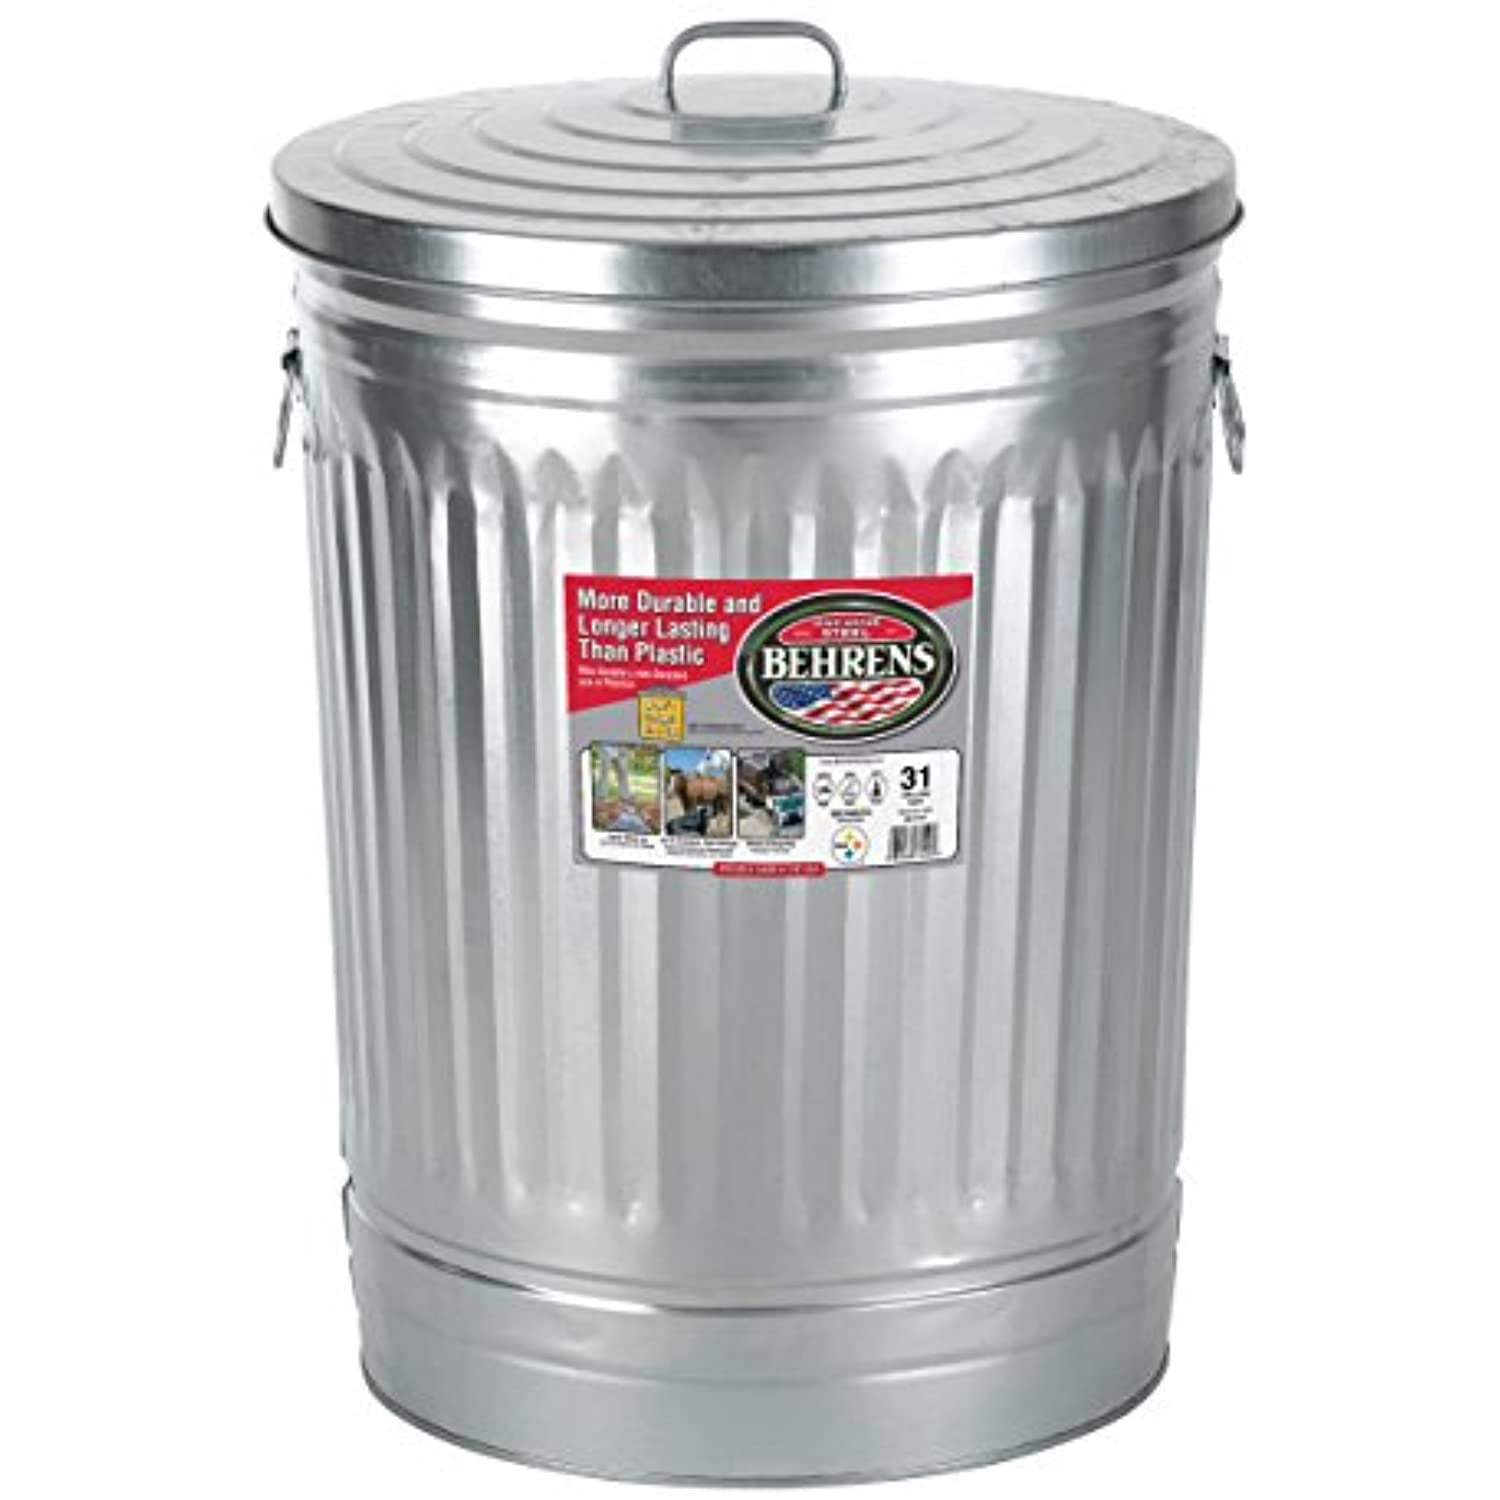 Stainless Steel Trash Can, 2.6 Gallon – Superio